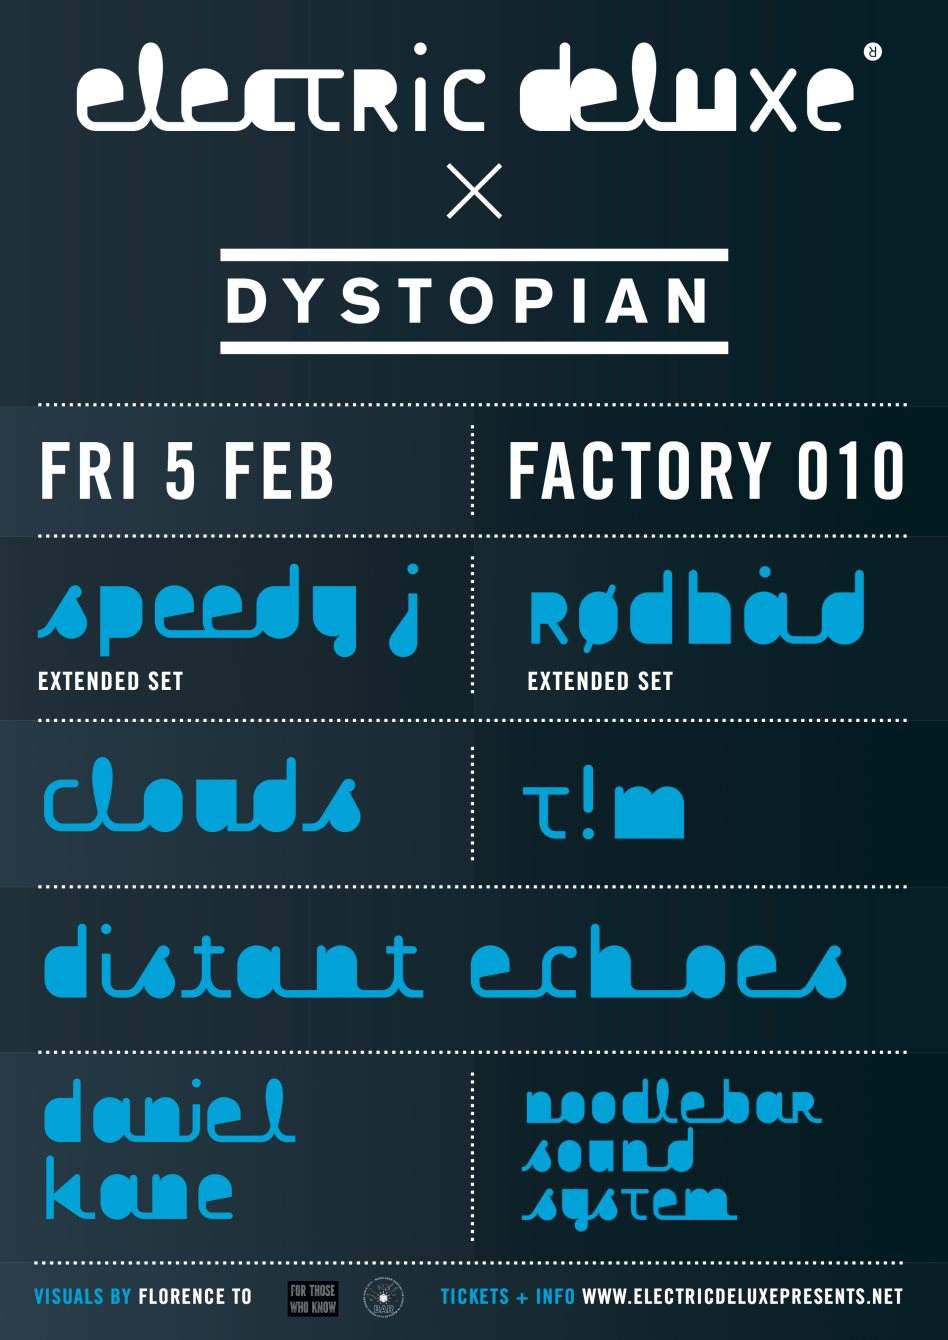 Electric Deluxe X Dystopian Speedy J, Rødhåd, Clouds,This Friday - フライヤー裏